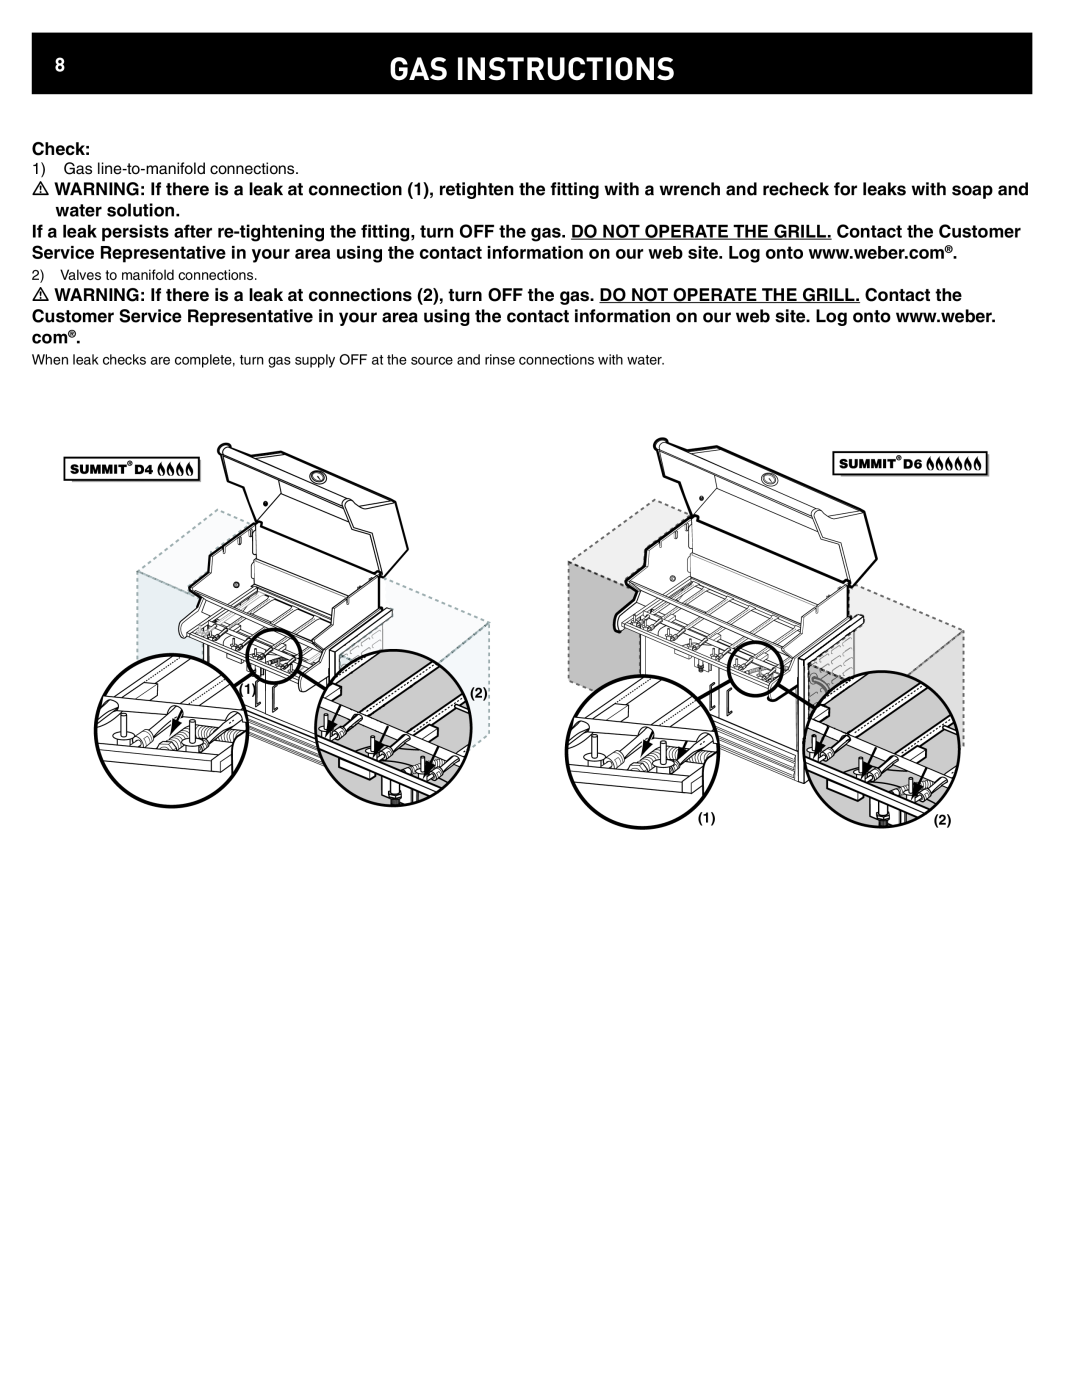 Weber D6, D4 manual Gas Instructions, Check, Gas line-to-manifold connections 